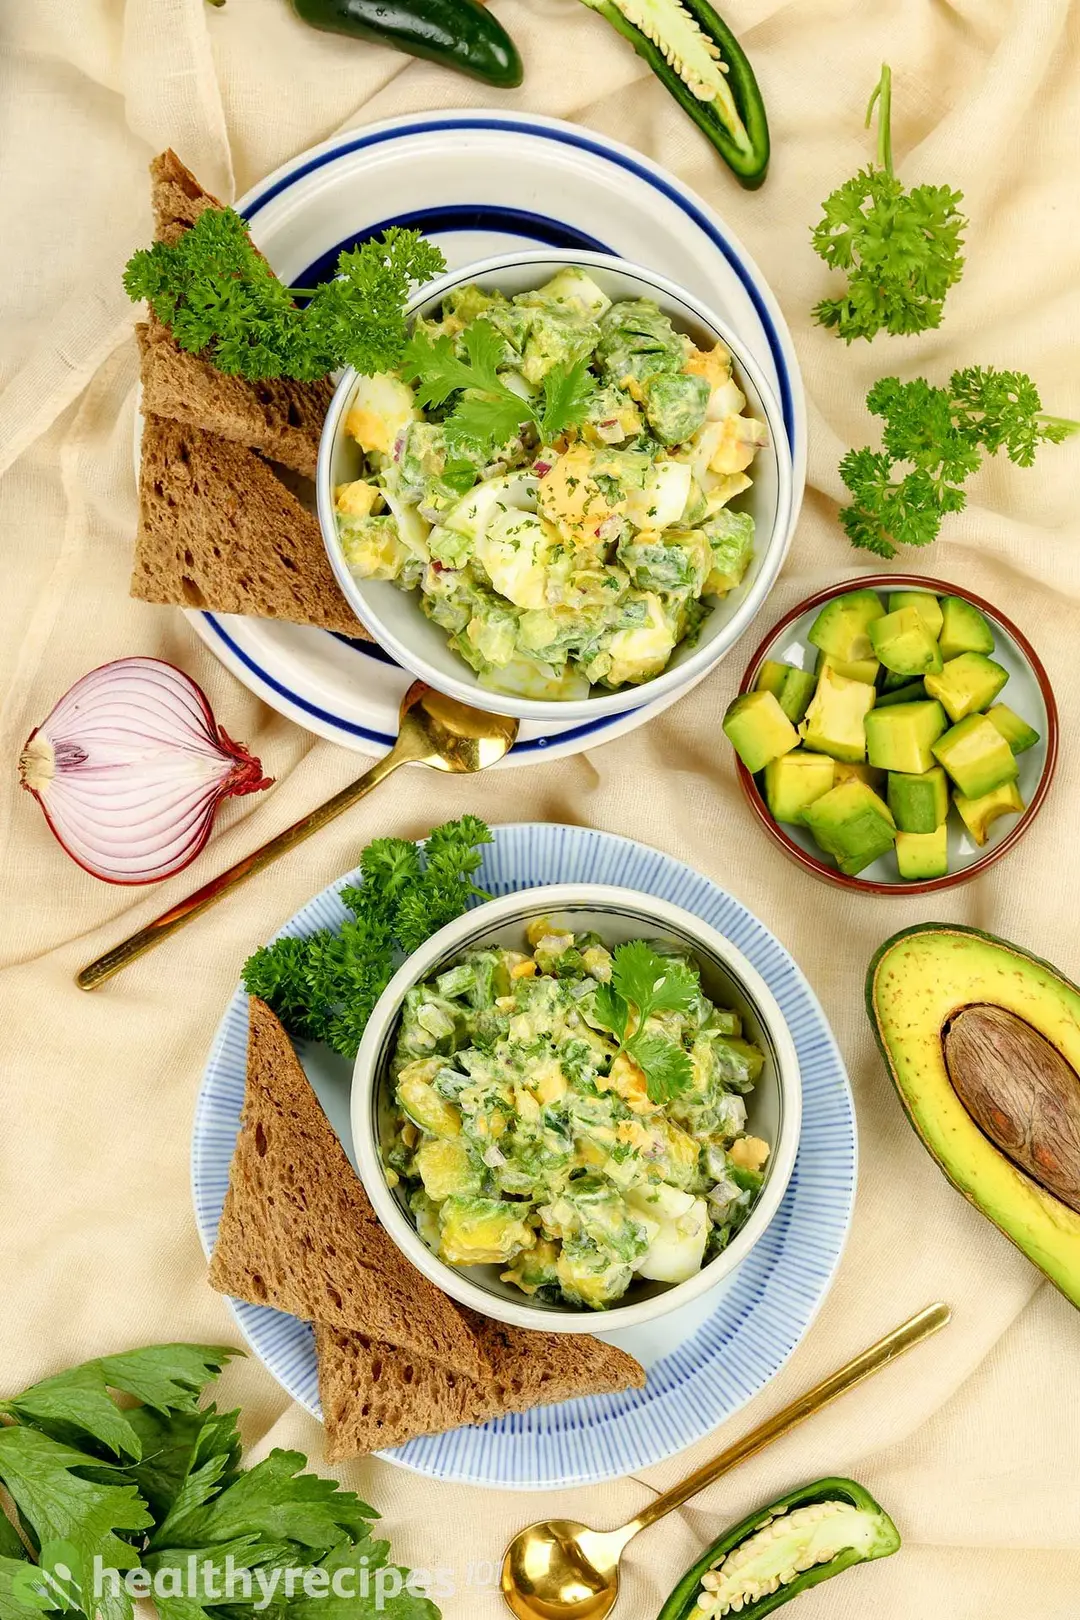 two plate with toast and a bowl of avocado salad on it, decorated by pepper, two spoon, a small avocado bowl and half avocado